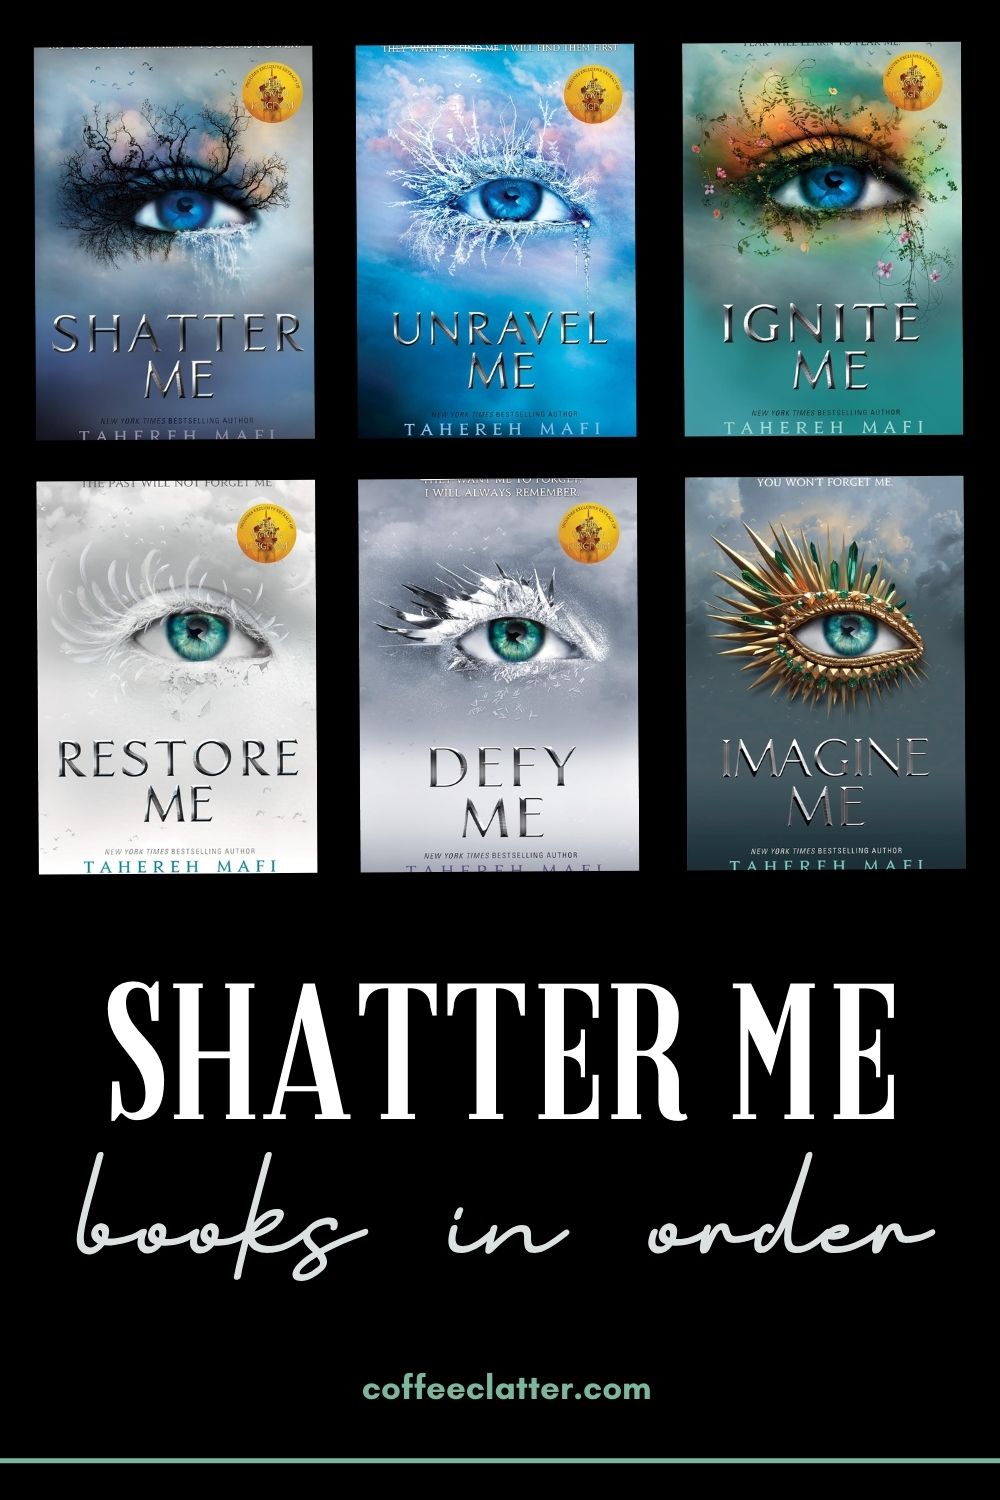 shatter me book series in order